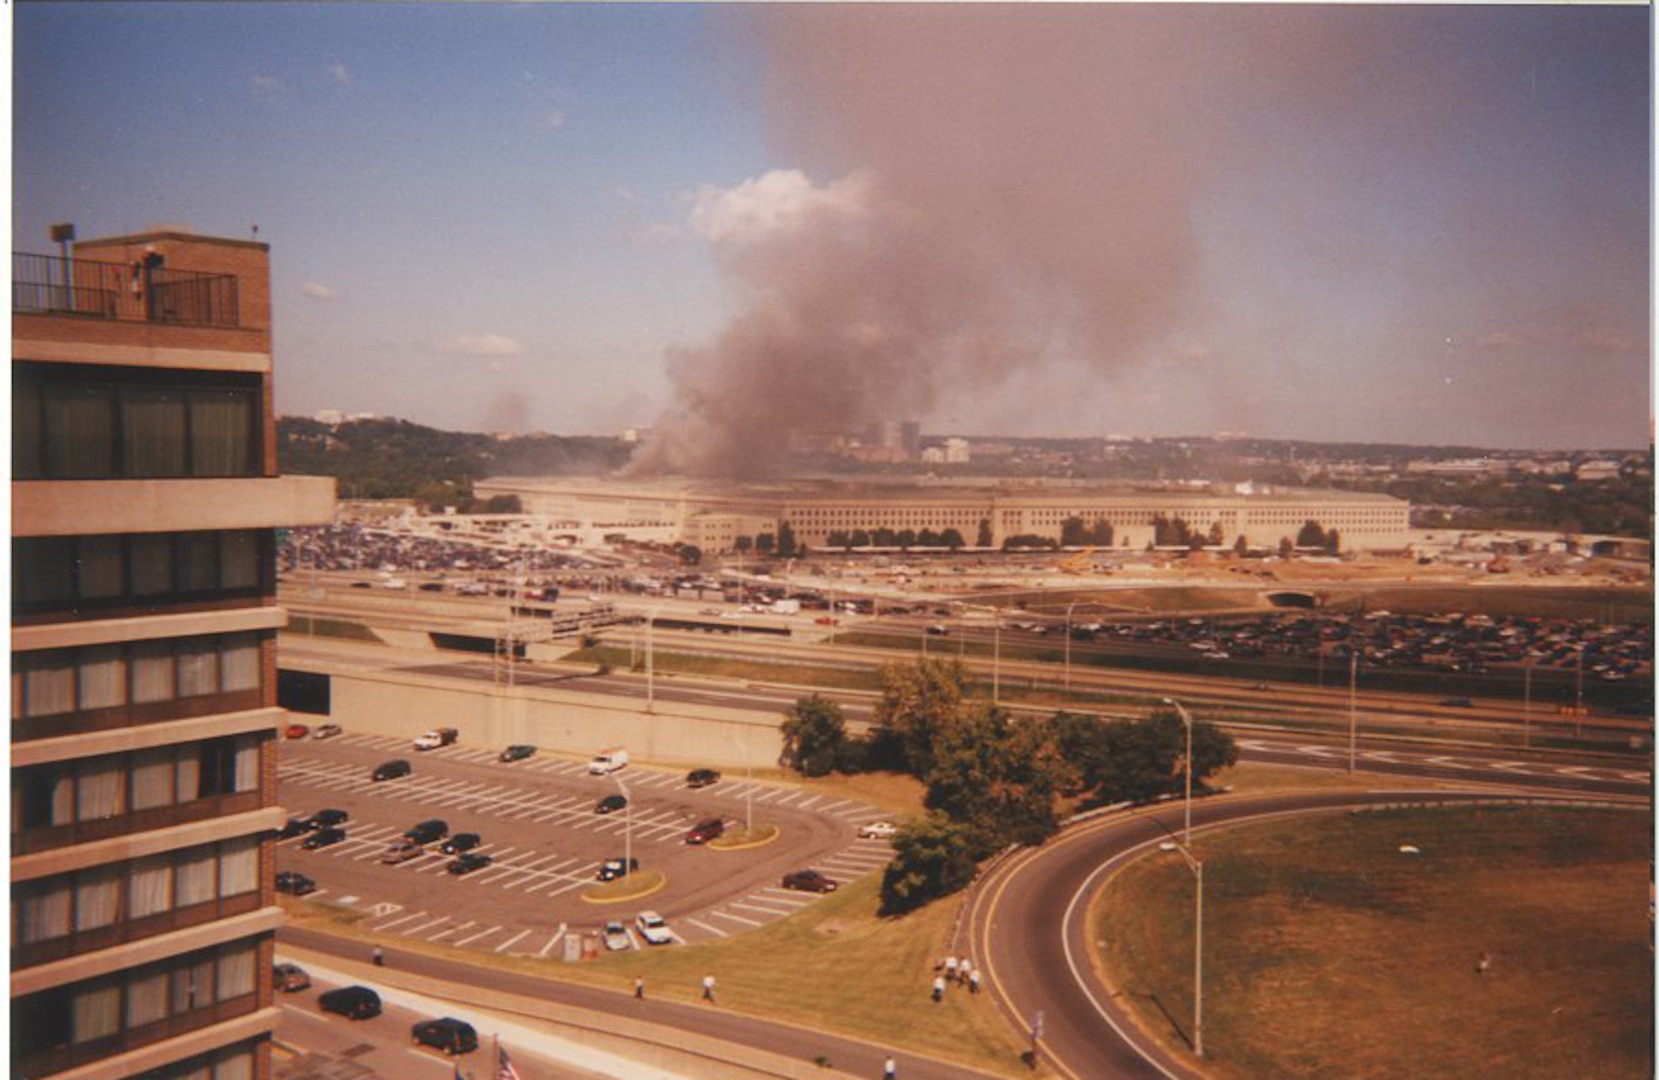 ​A view of the Pentagon following the attack using Flight 77 as a weapon, taken by Col. (Retired) Larry Ciancio, from his hotel room Sept. 11, 2001.